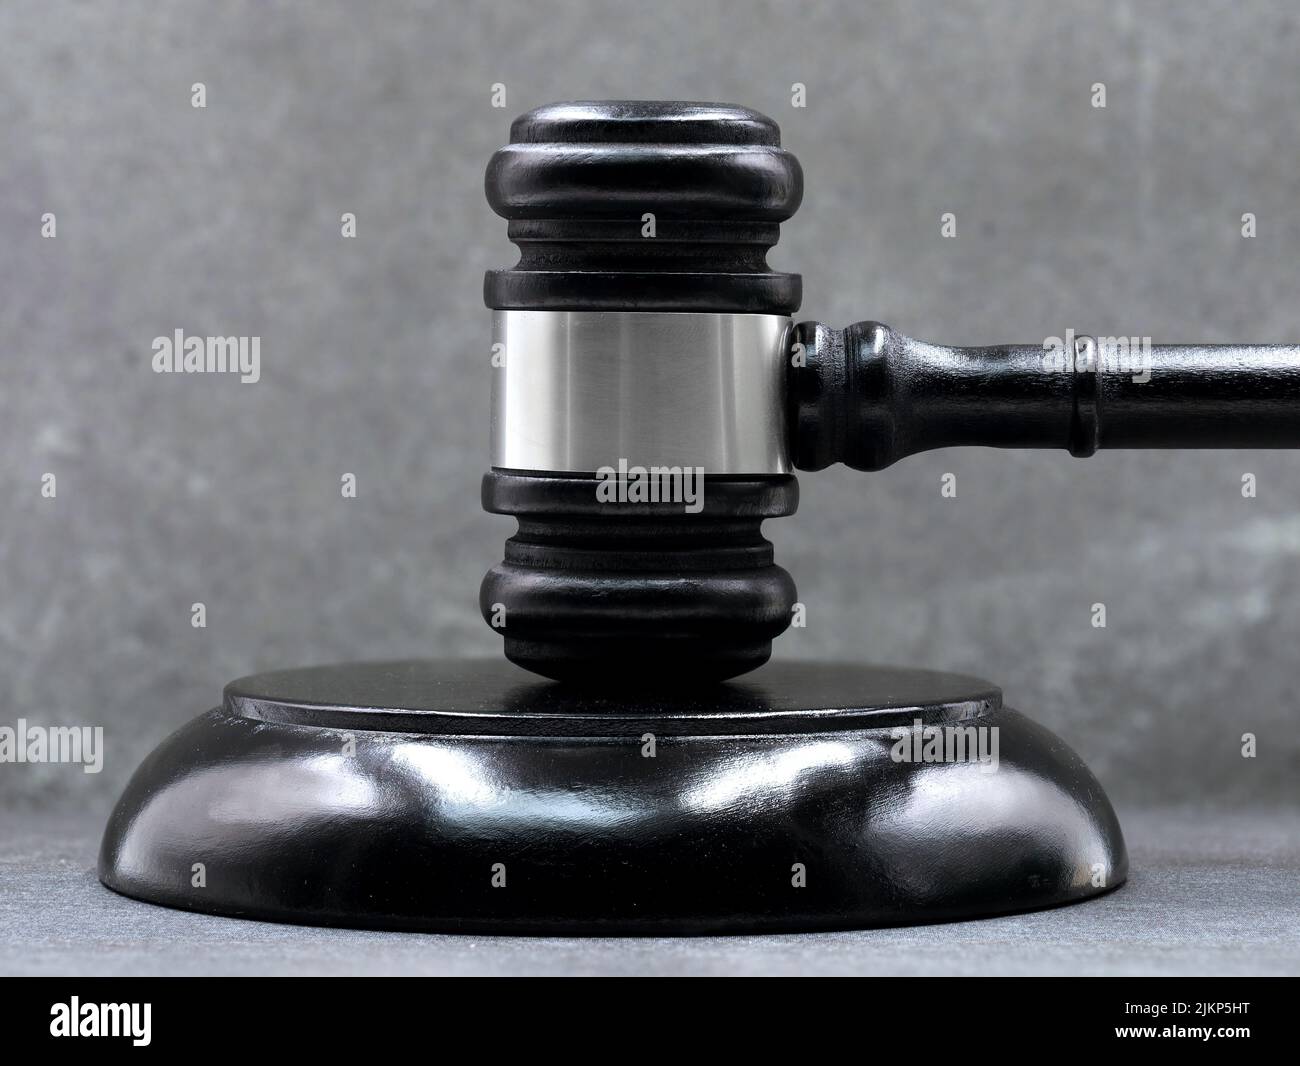 close up of black judge gavel against gray wall background Stock Photo